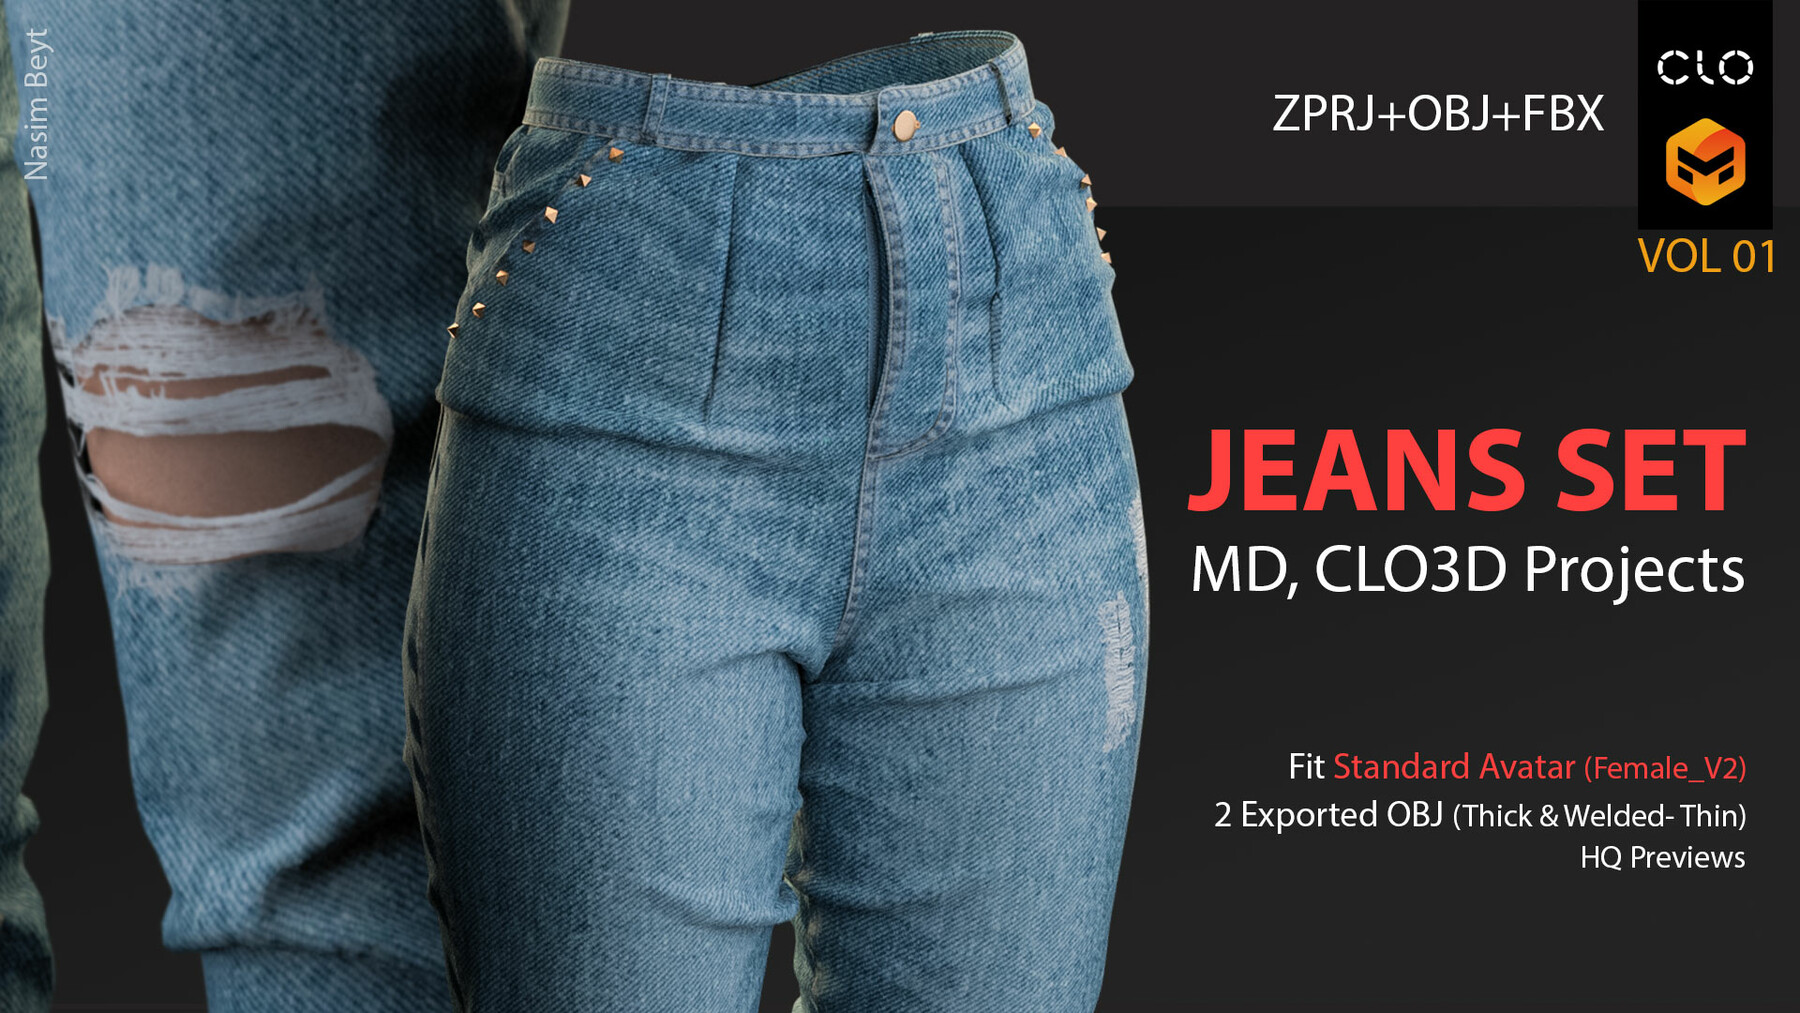 ArtStation - 3 Different Jeans Sets (VOL 01) with Texture. CLO3D, MD PROJECTS+OBJ+FBX Game Assets